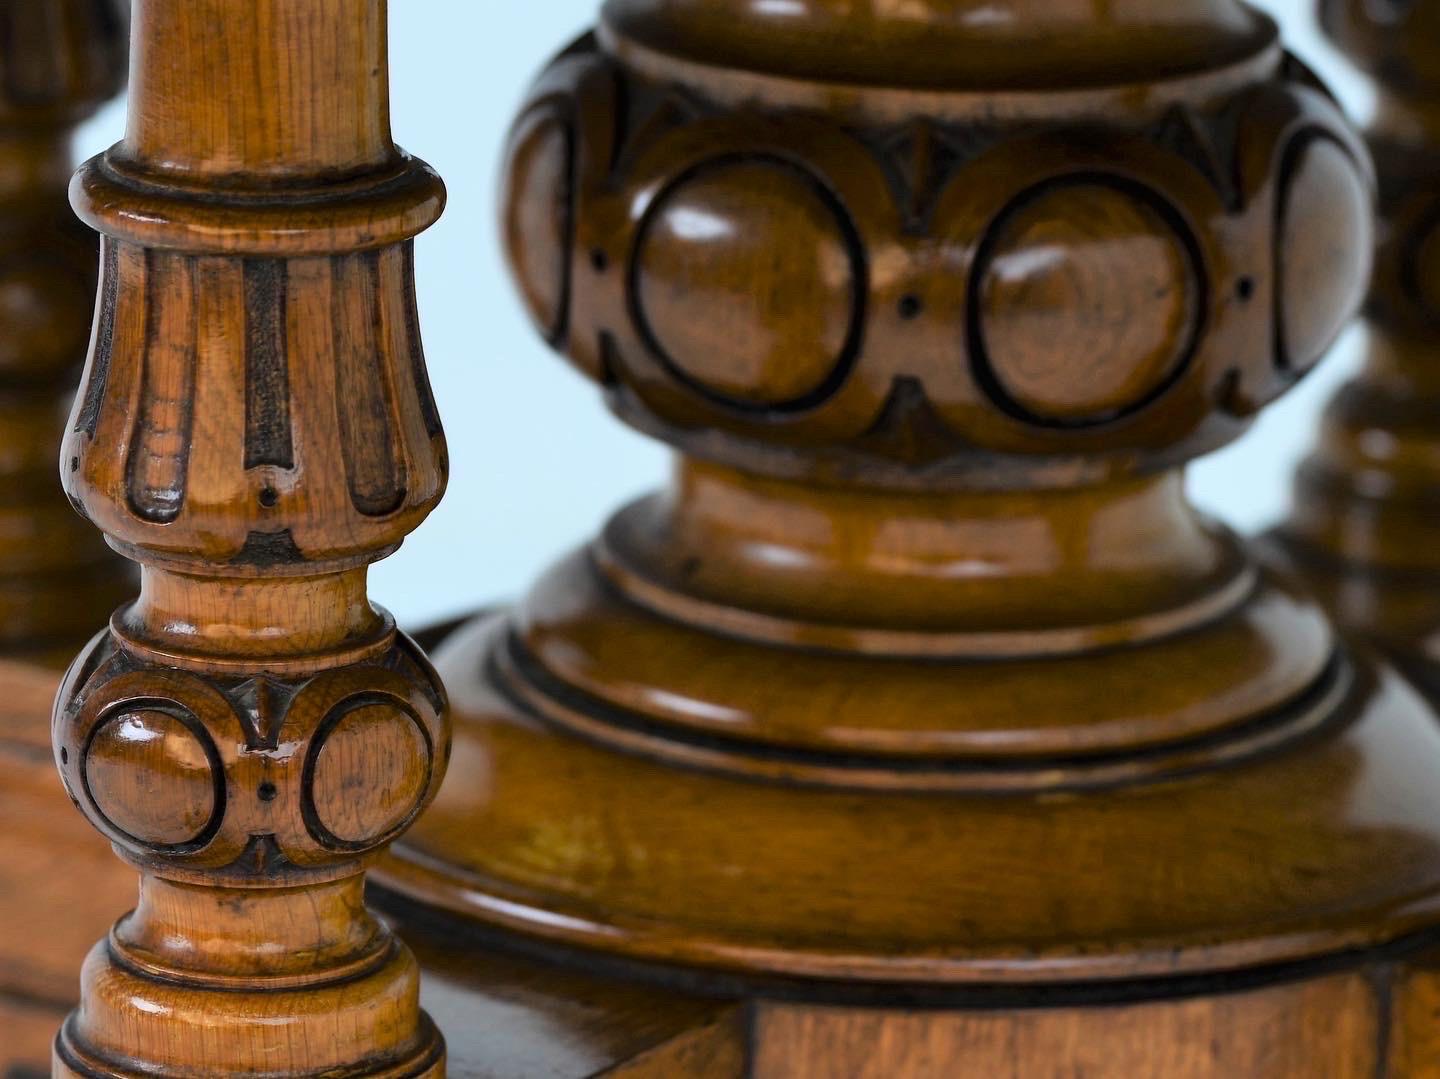 Description
Stamped and numbered oak octagonal drum Gillow and Co. pedestal table, circa 1860. Untouched and 100% authentic with just shy of 160 years of patina. This is a important museum grade item that's still very functional up to this day.